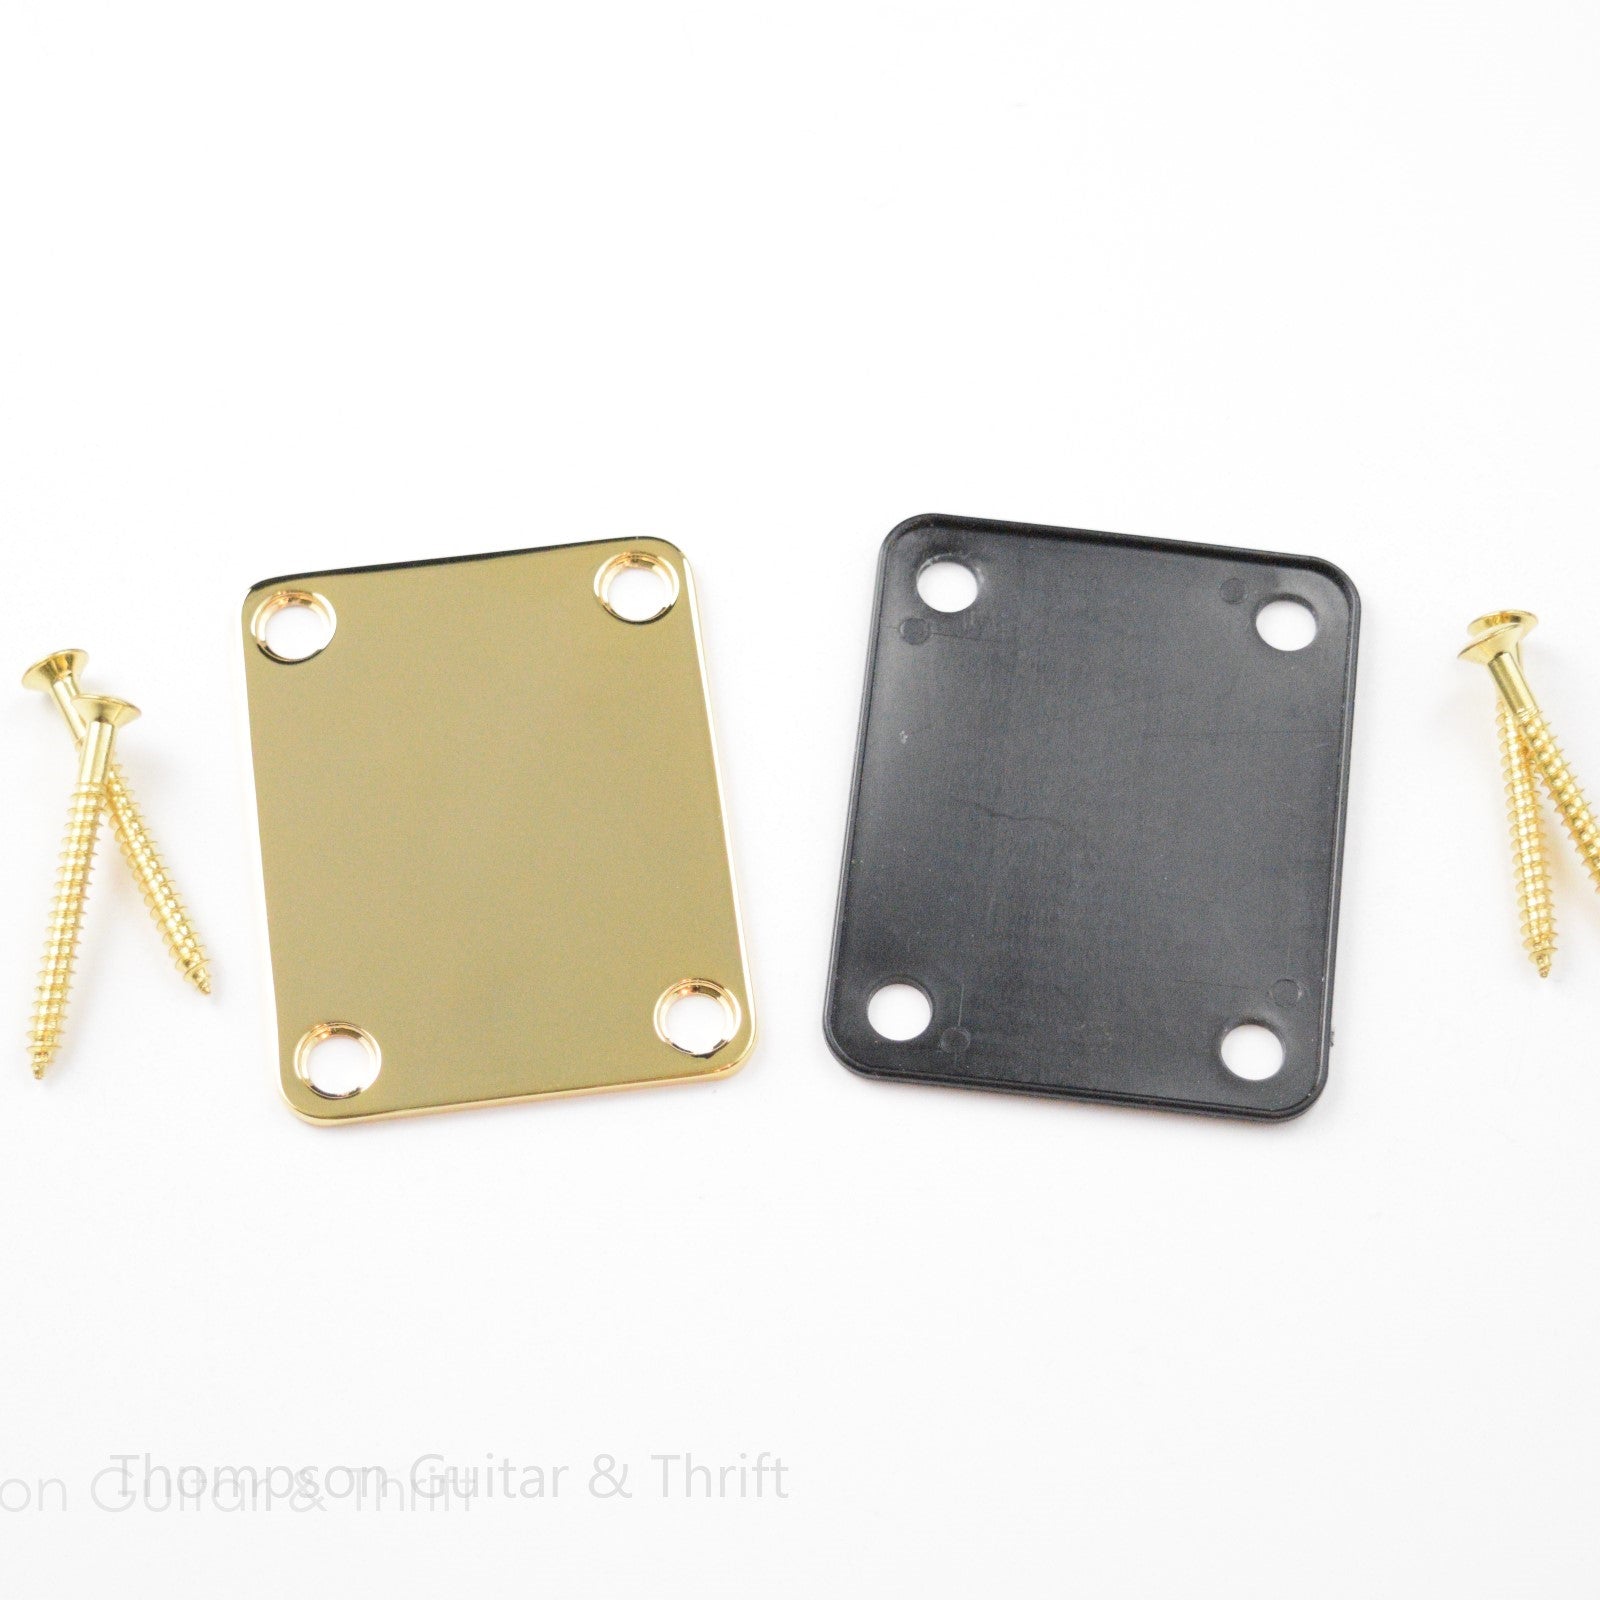 Gold Neck Plate, Gasket and Screws for Guitar